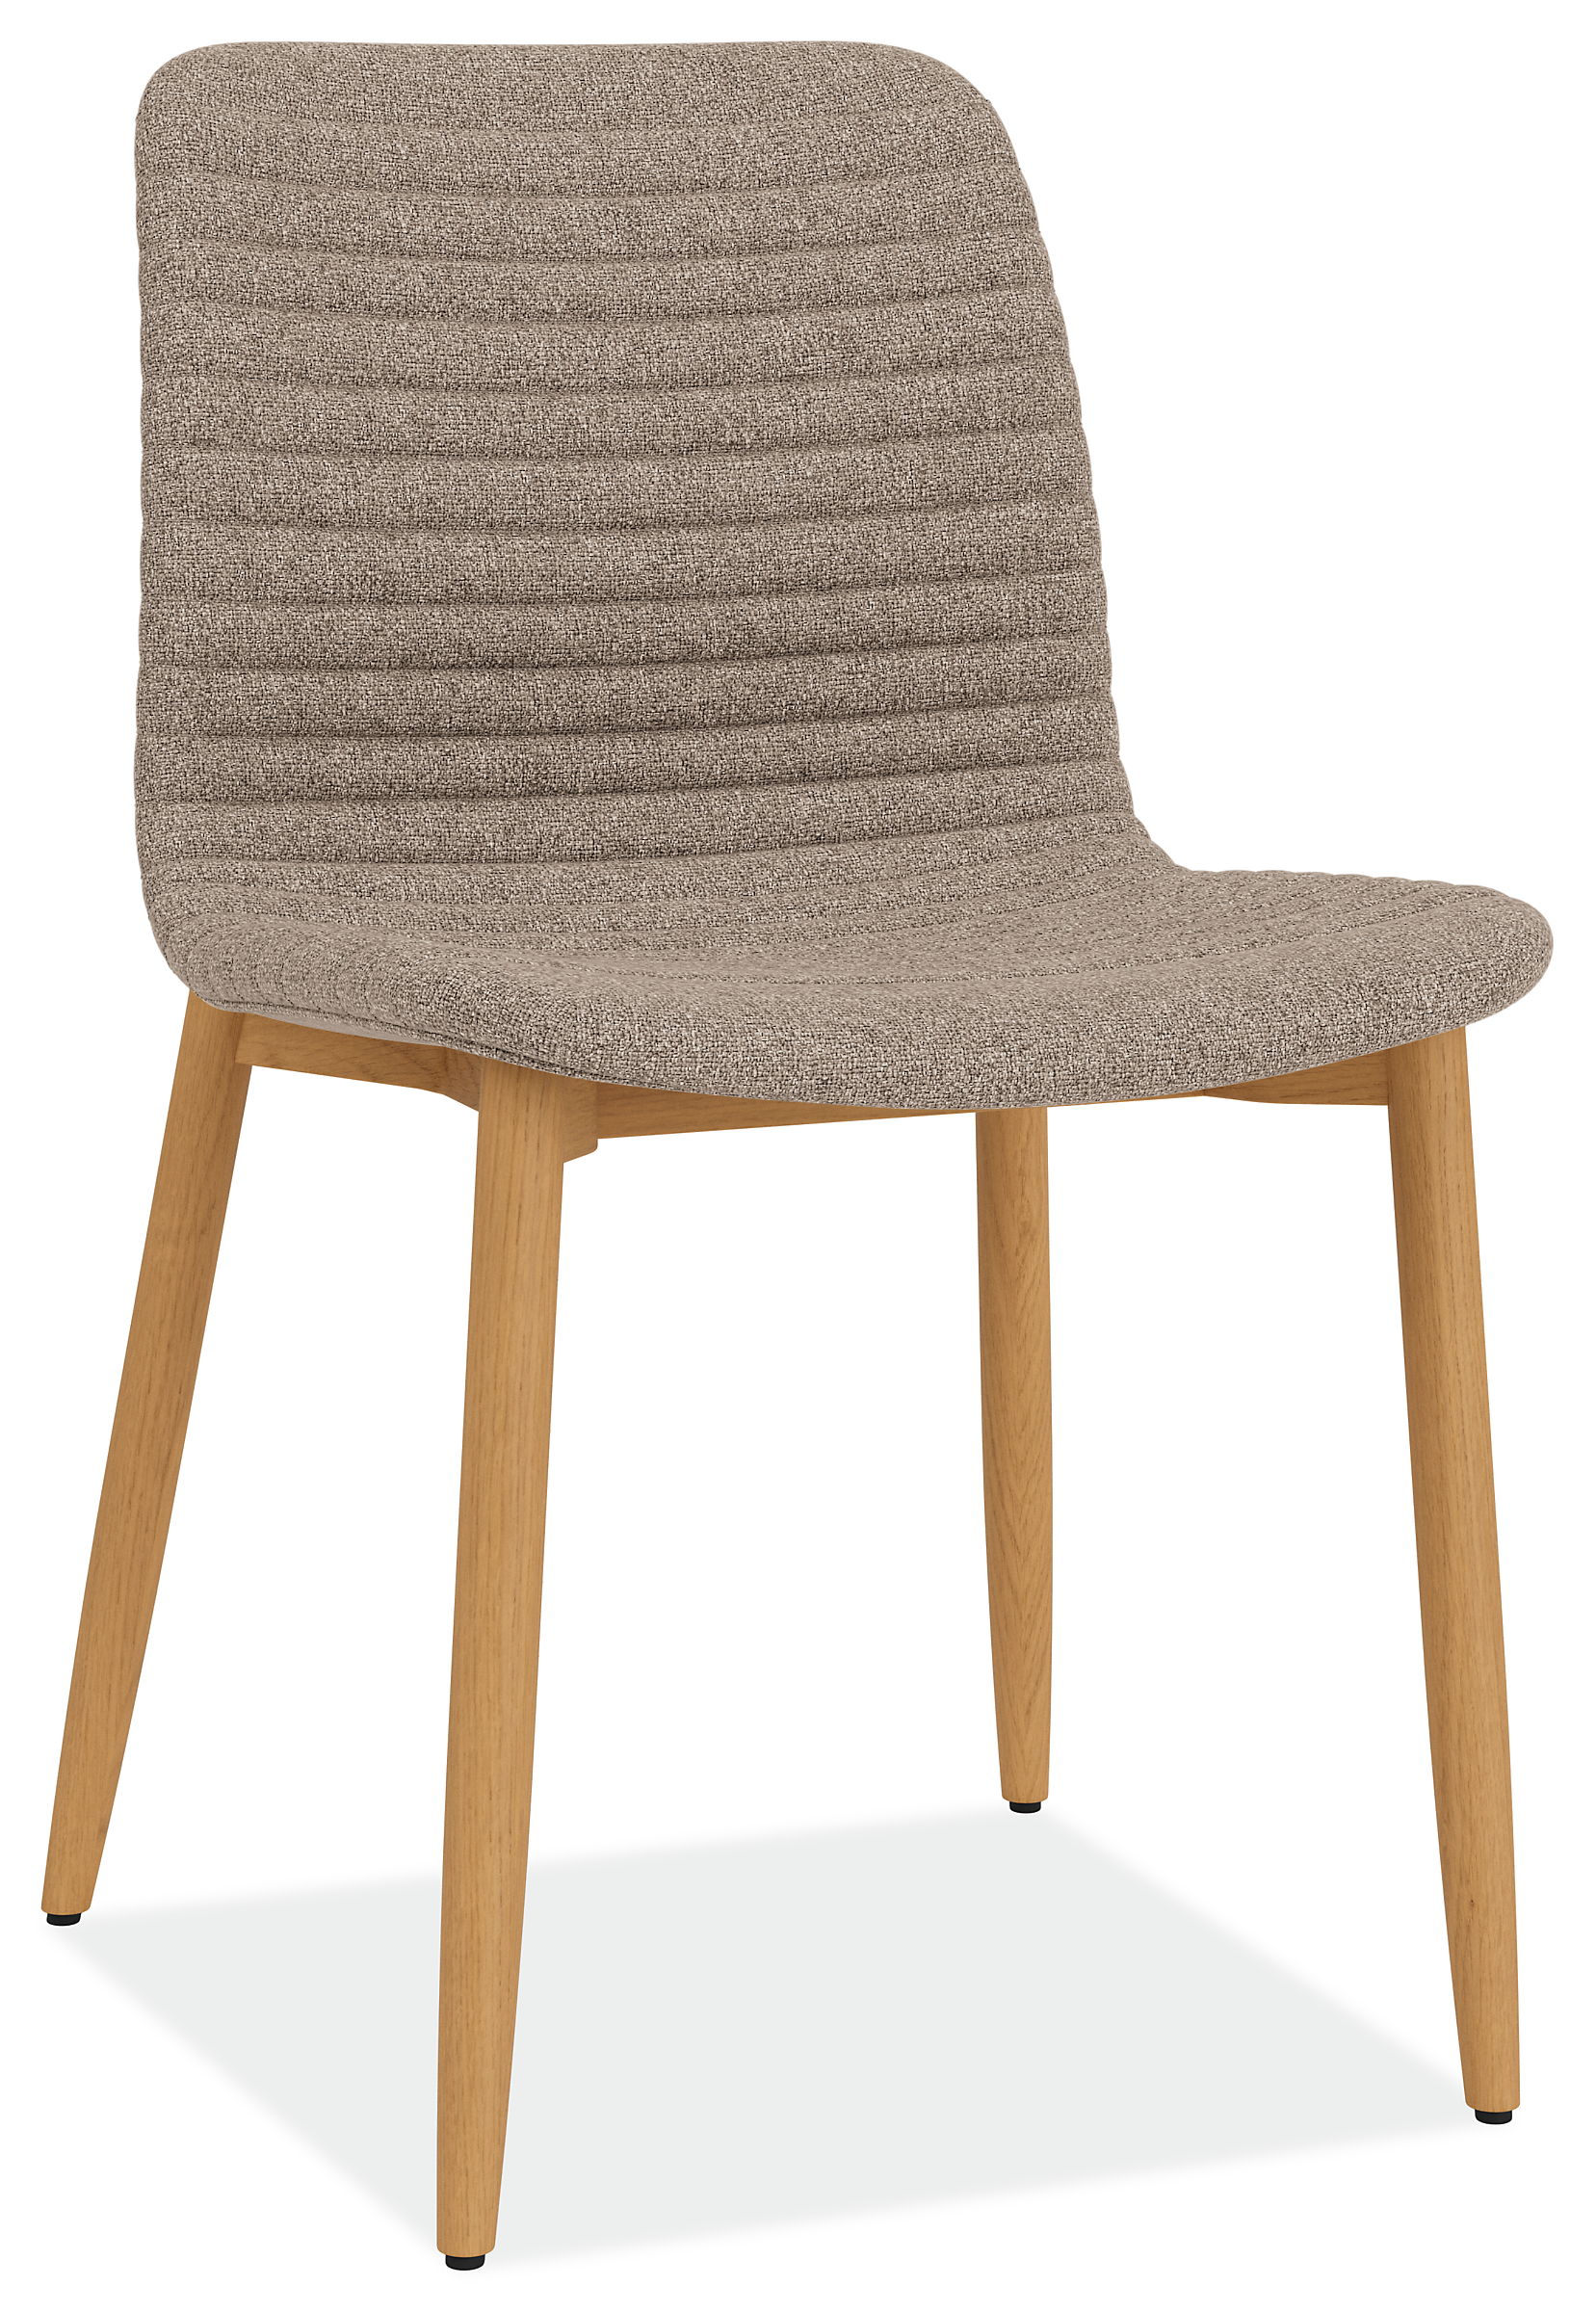 Cato Chair